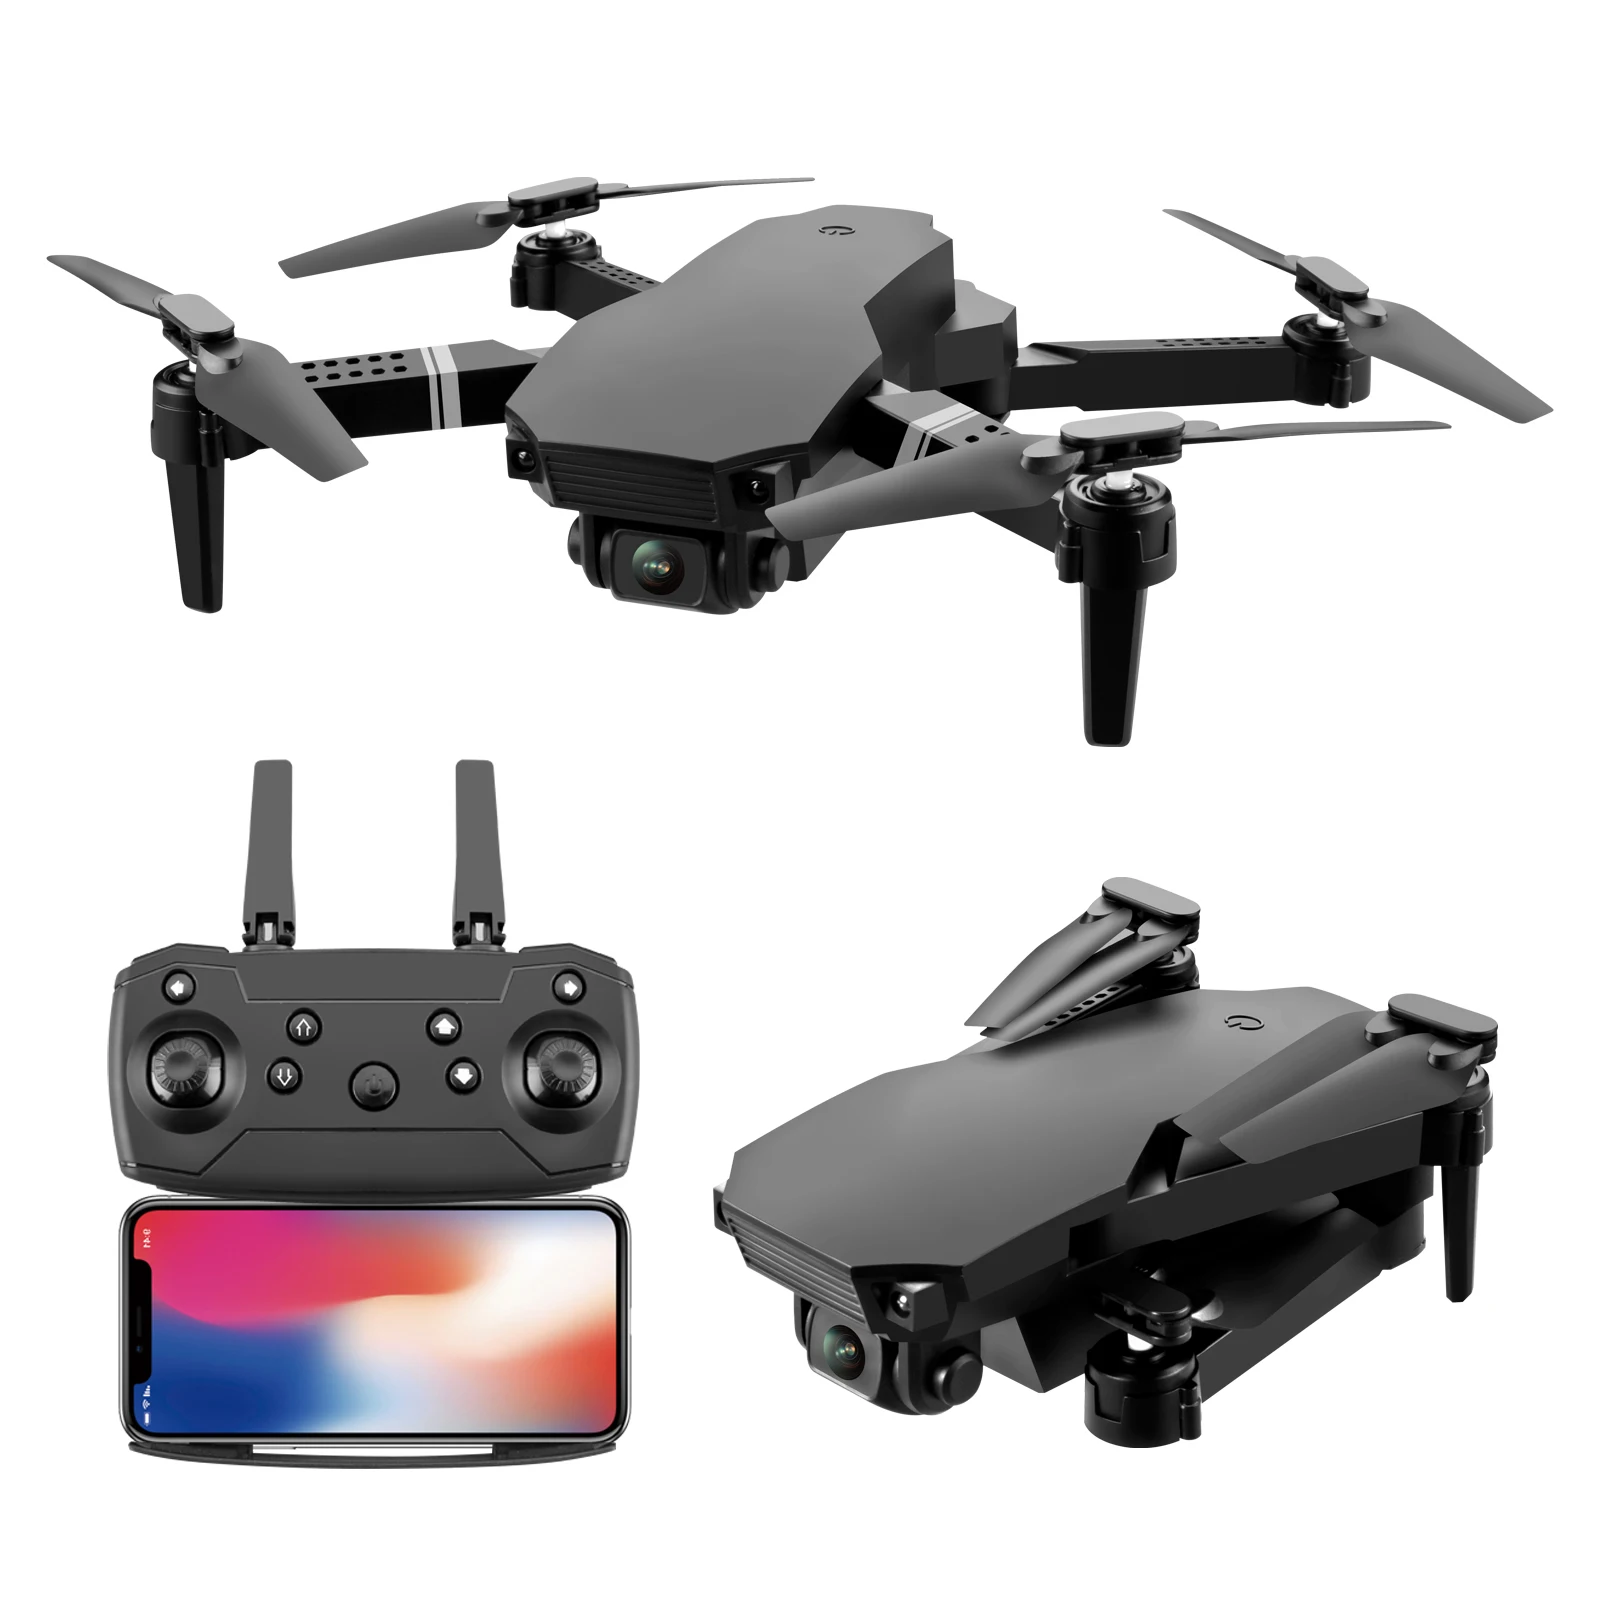 

Remote control drone folding four-axis aircraft HD camera 4K aerial photography aircraft fixed height toy, Black